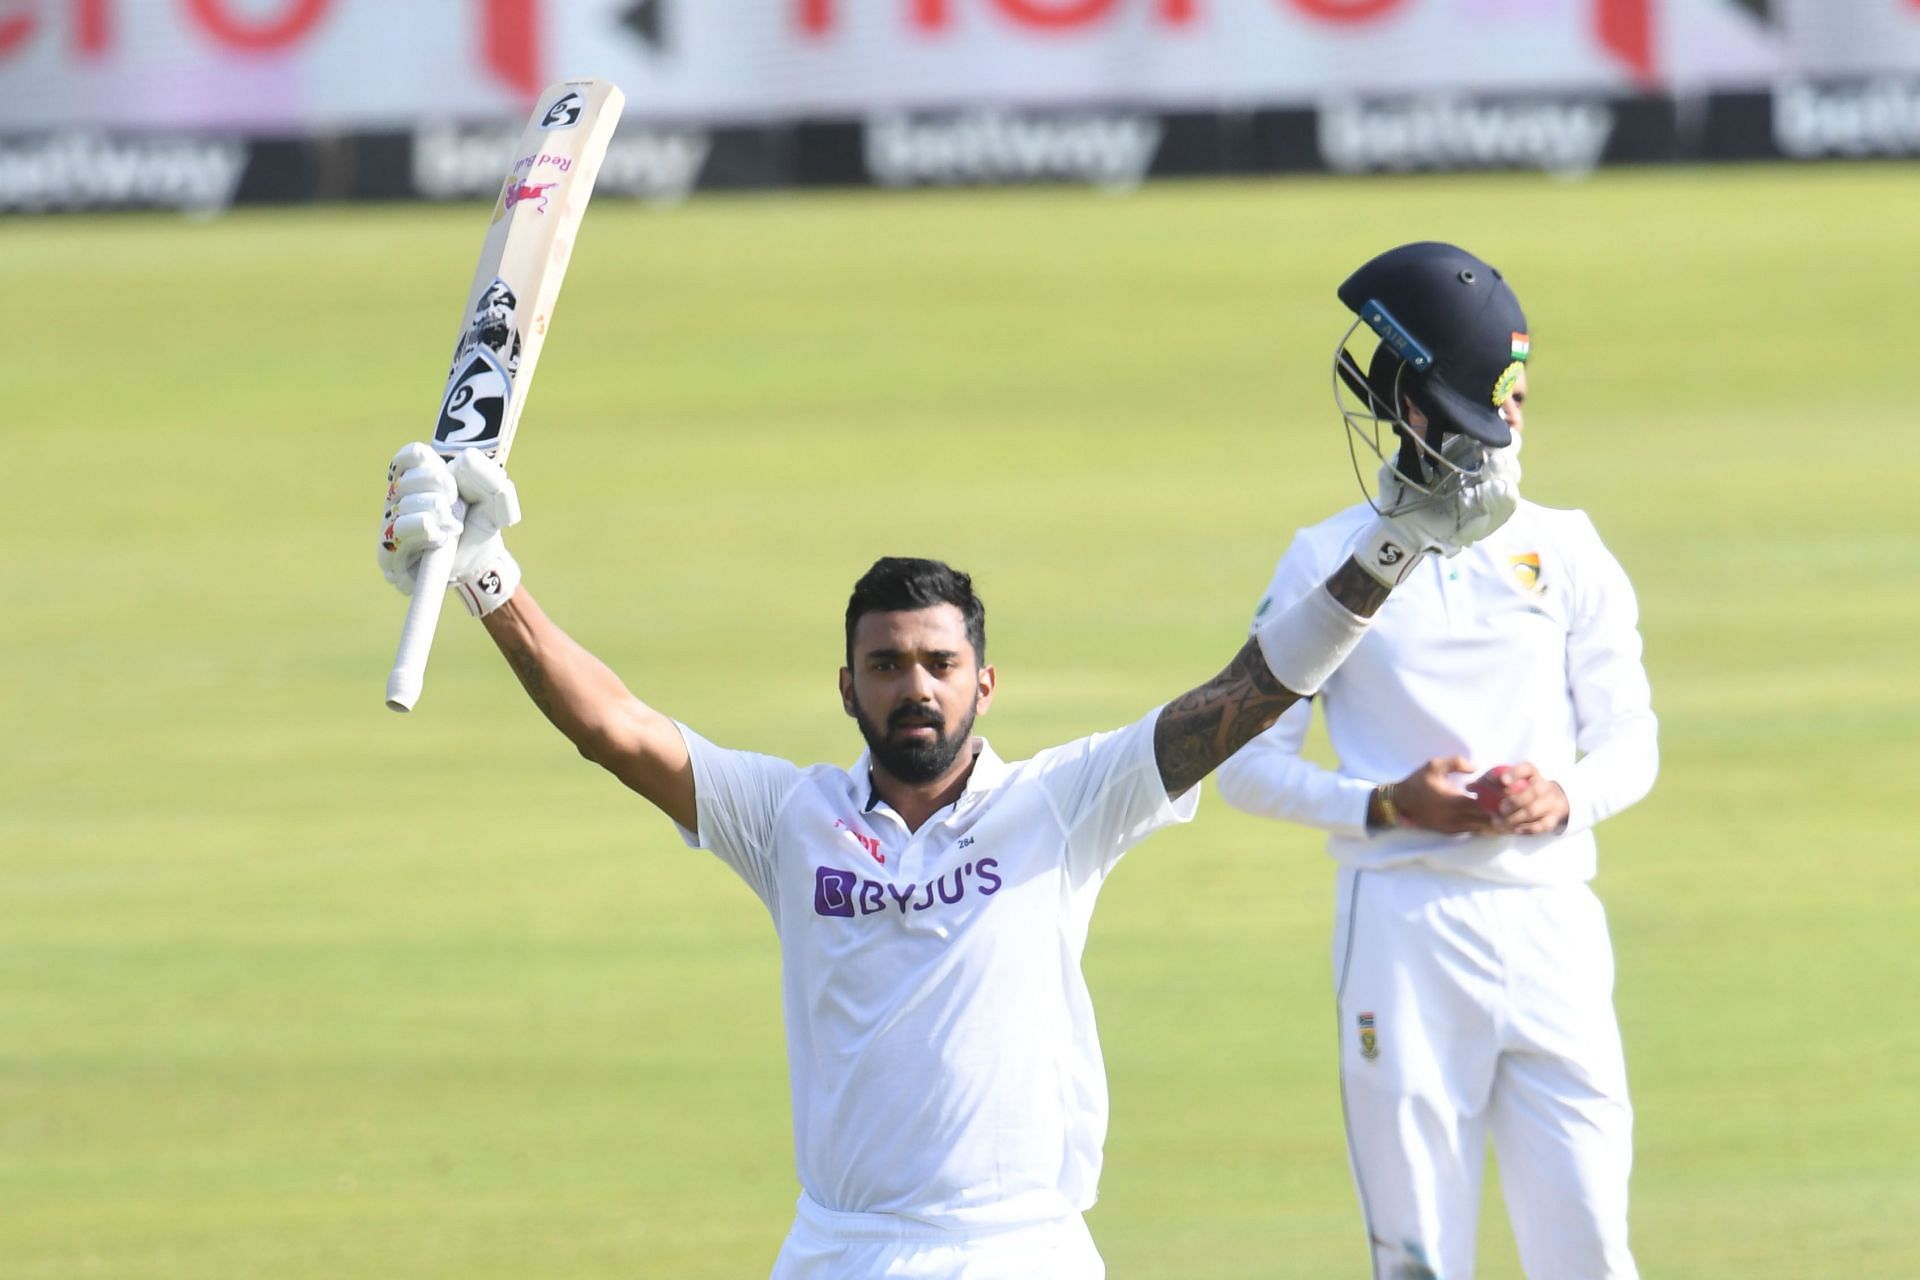 KL Rahul is comfortable playing both defensive and attacking brands of cricket